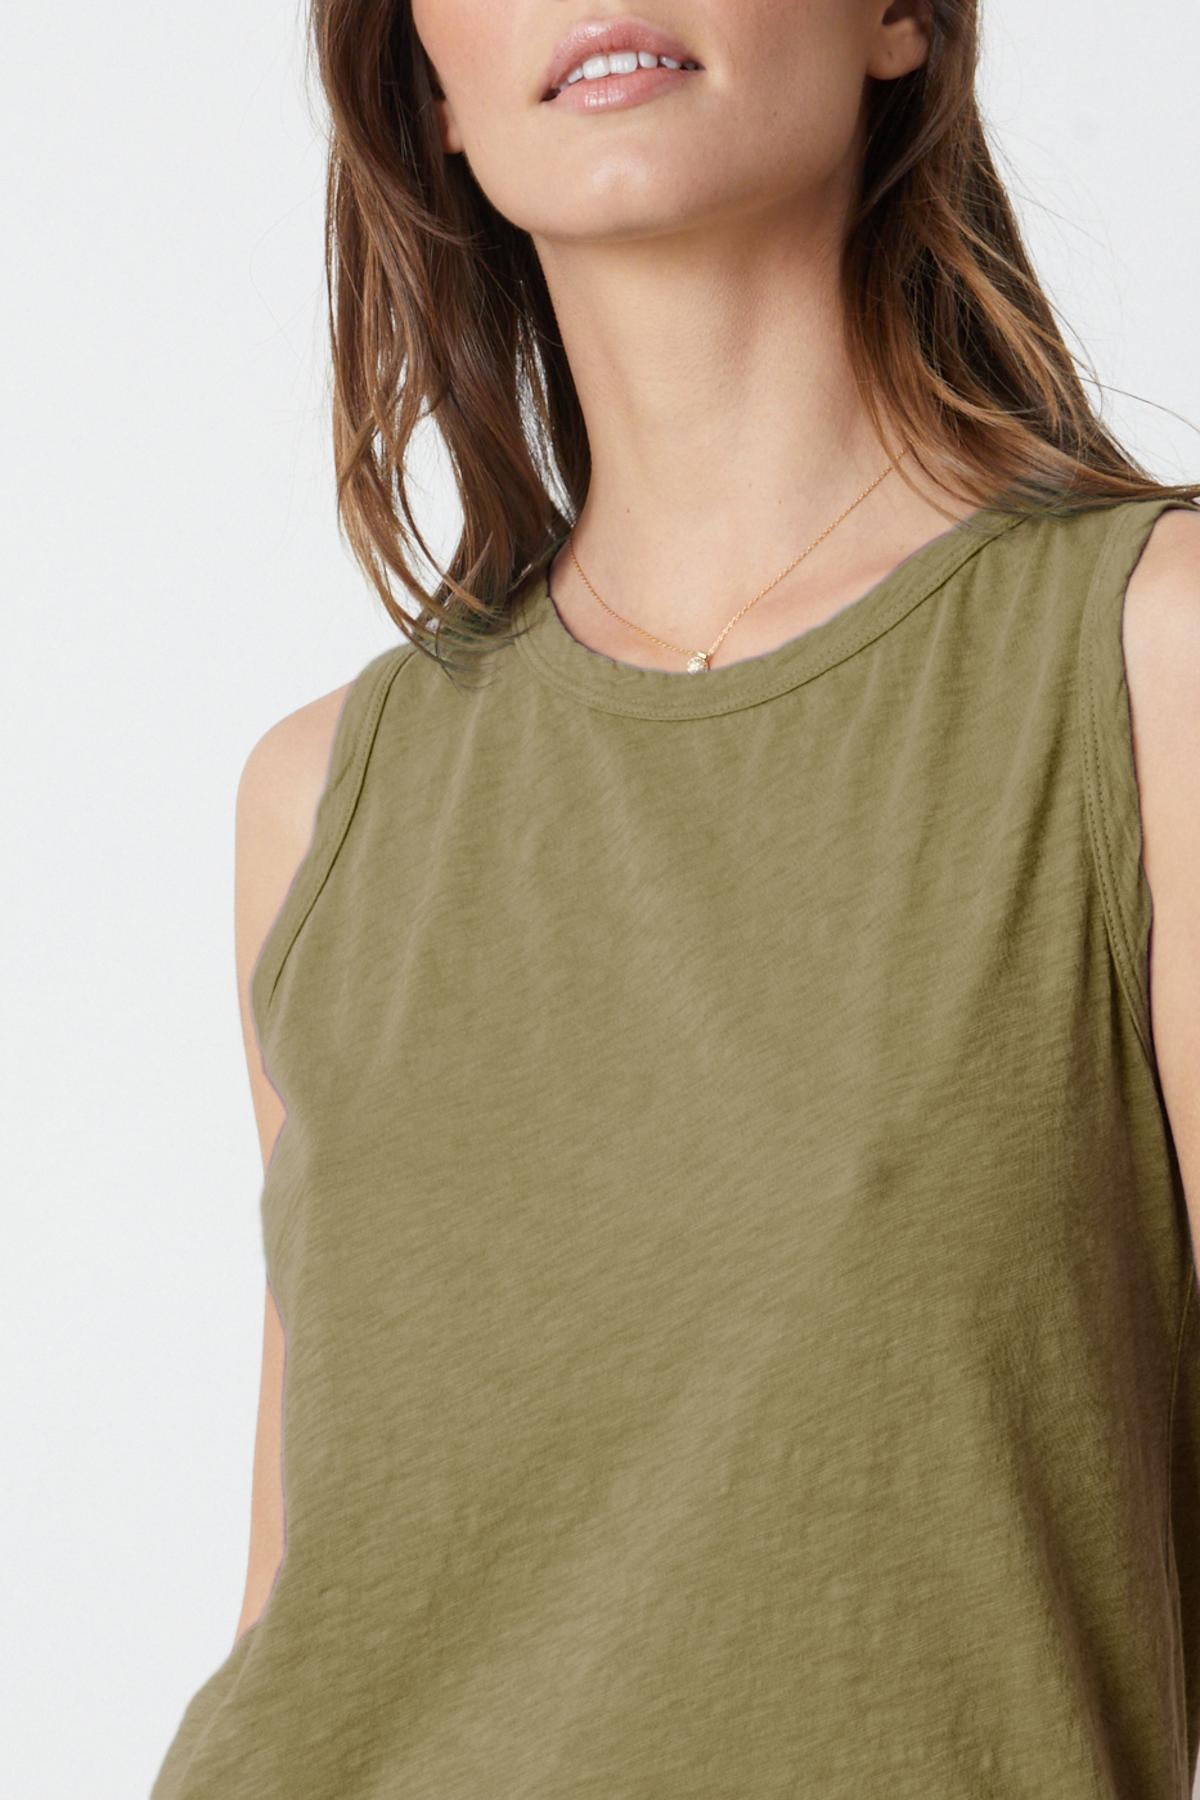   The TAURUS COTTON SLUB TANK in olive green is sleeveless and made from cotton slub by Velvet by Graham & Spencer. 